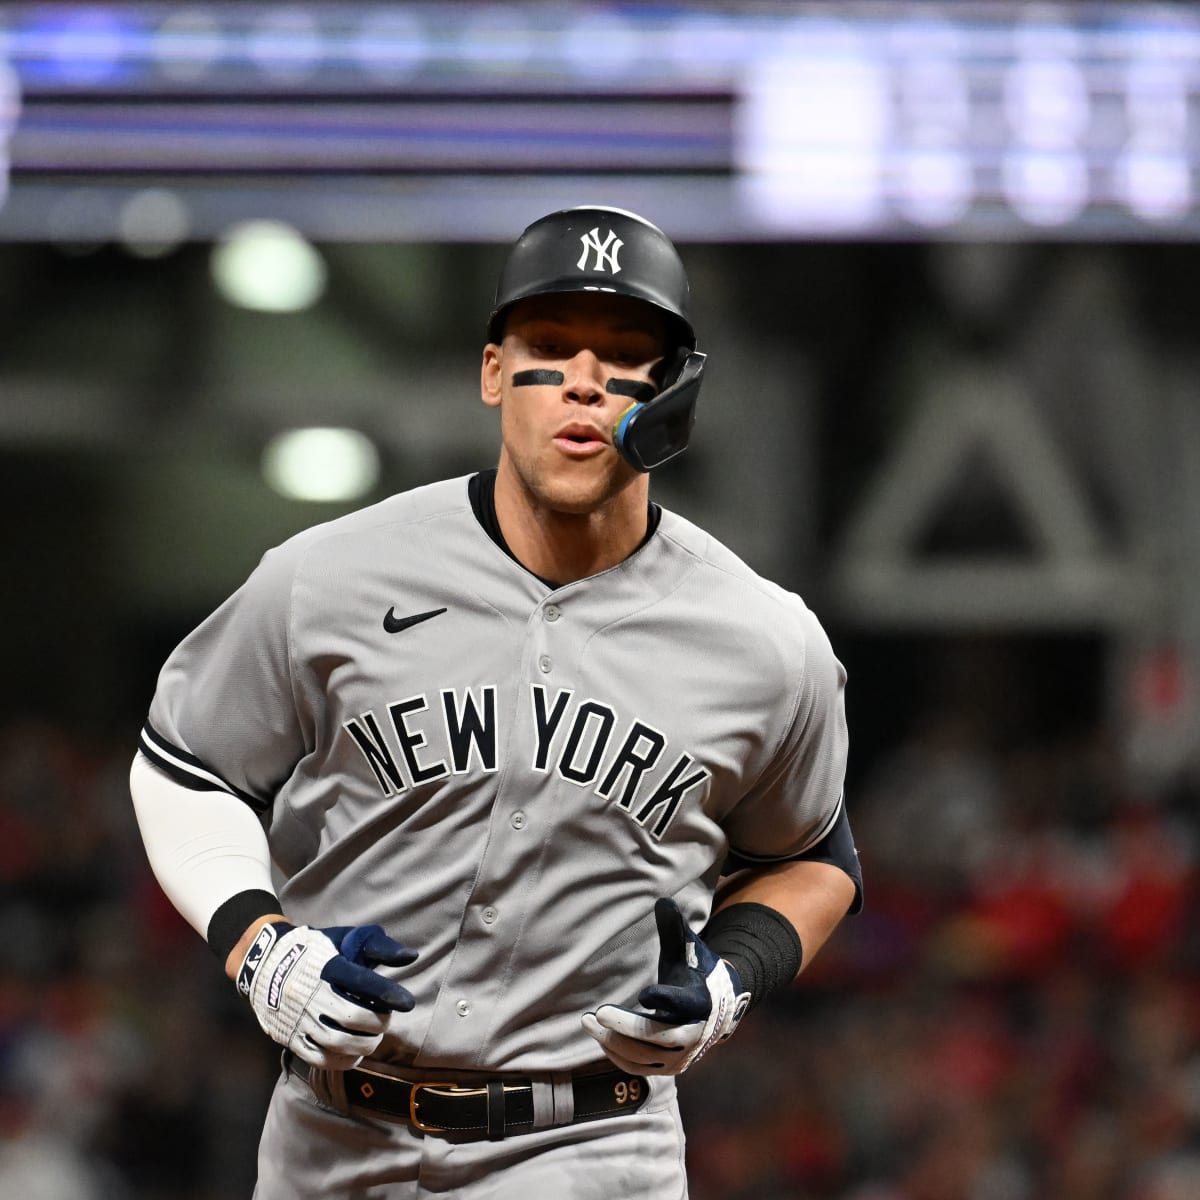 Yankees' Free Agent Aaron Judge To Meet With San Francisco Giants - Fastball